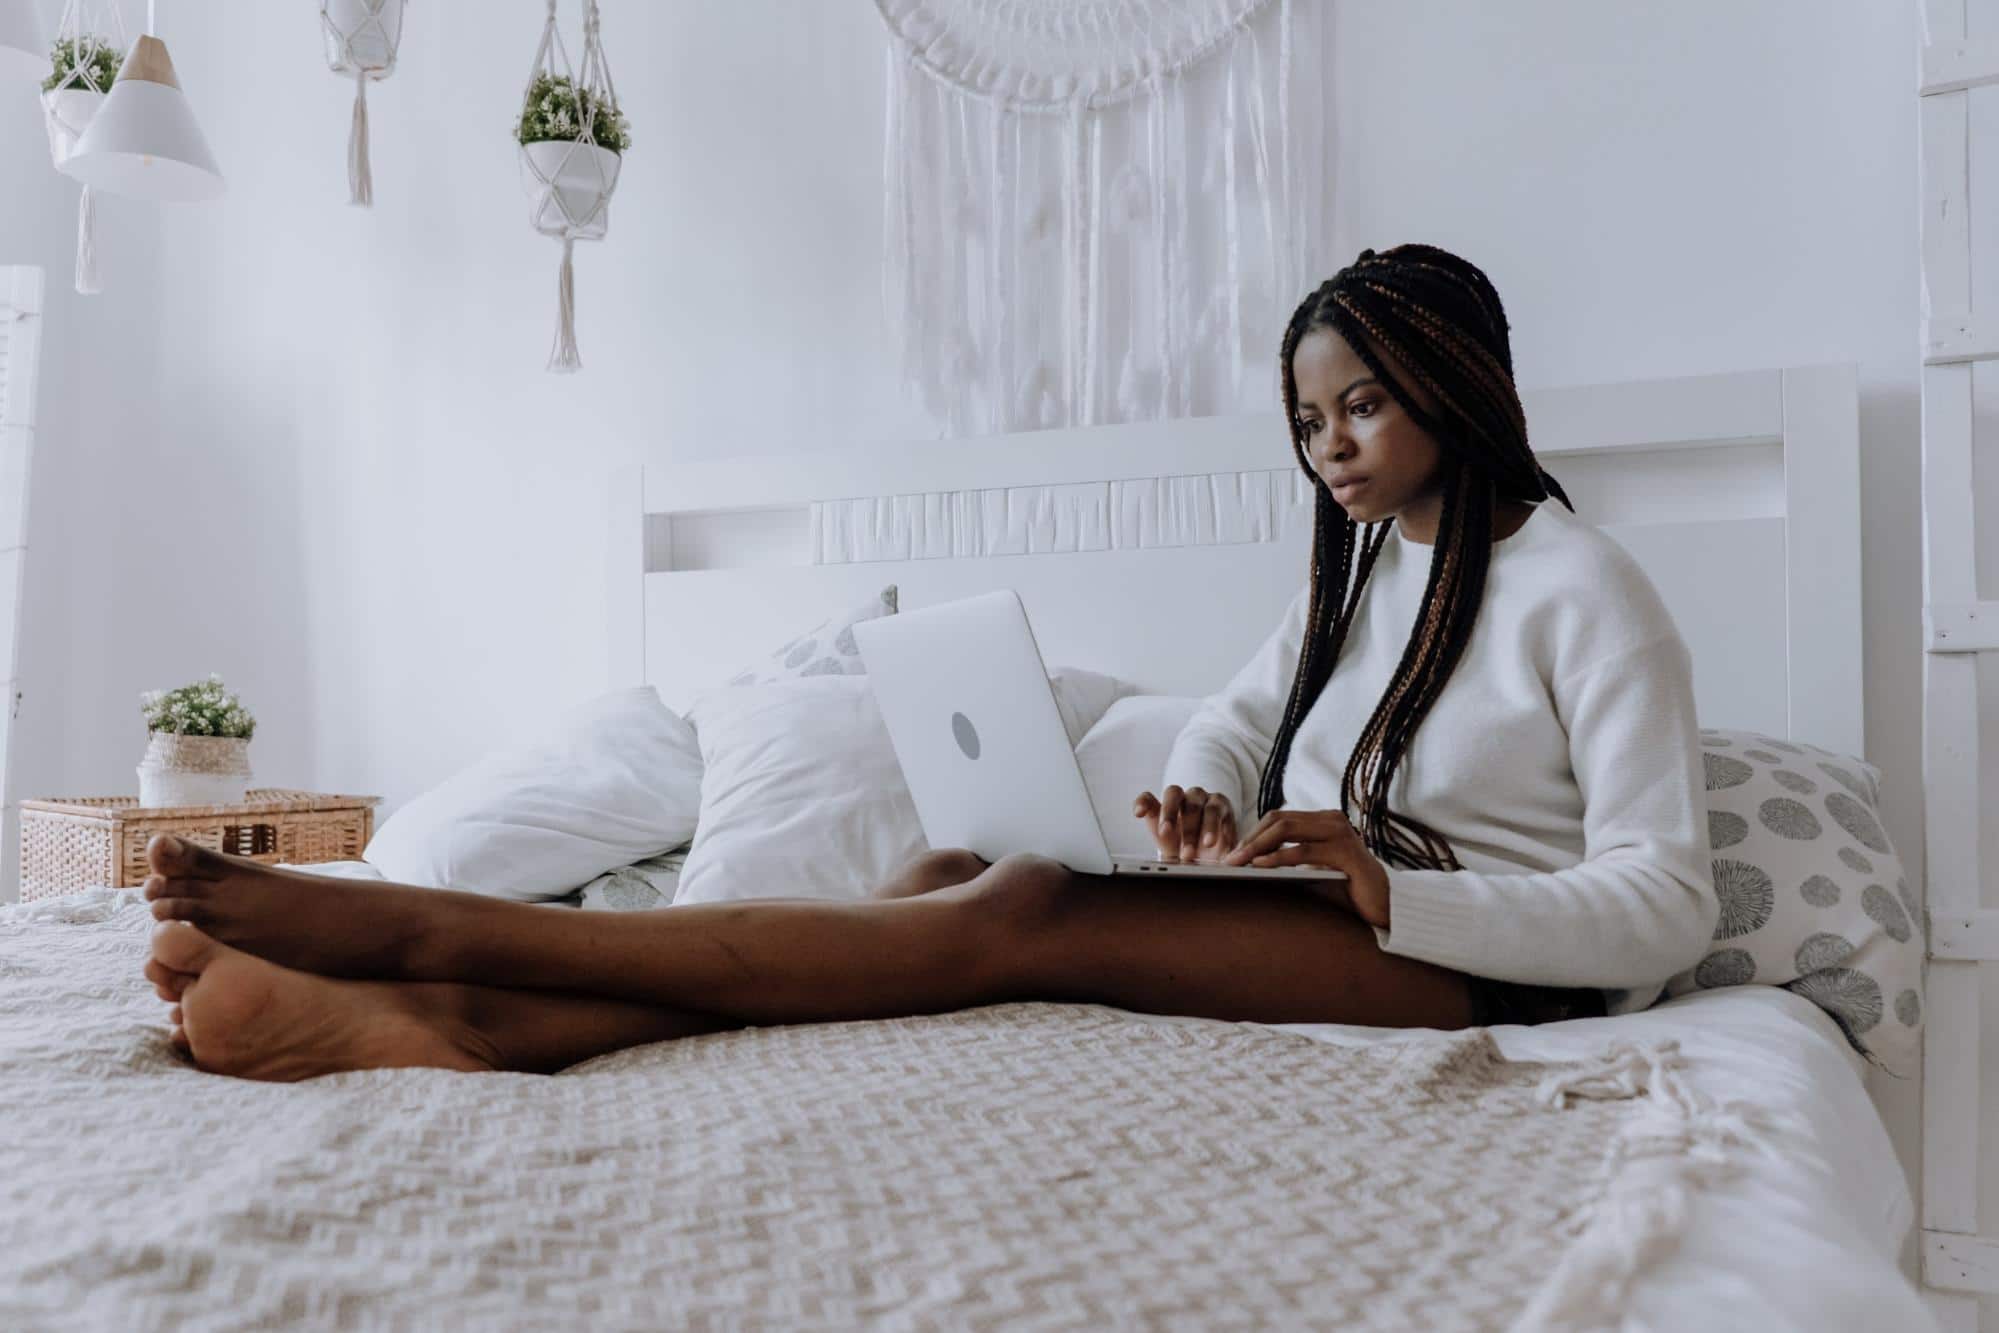 Healthy young woman sitting on her bed using a laptop to research the difference between prebiotics and probiotics.